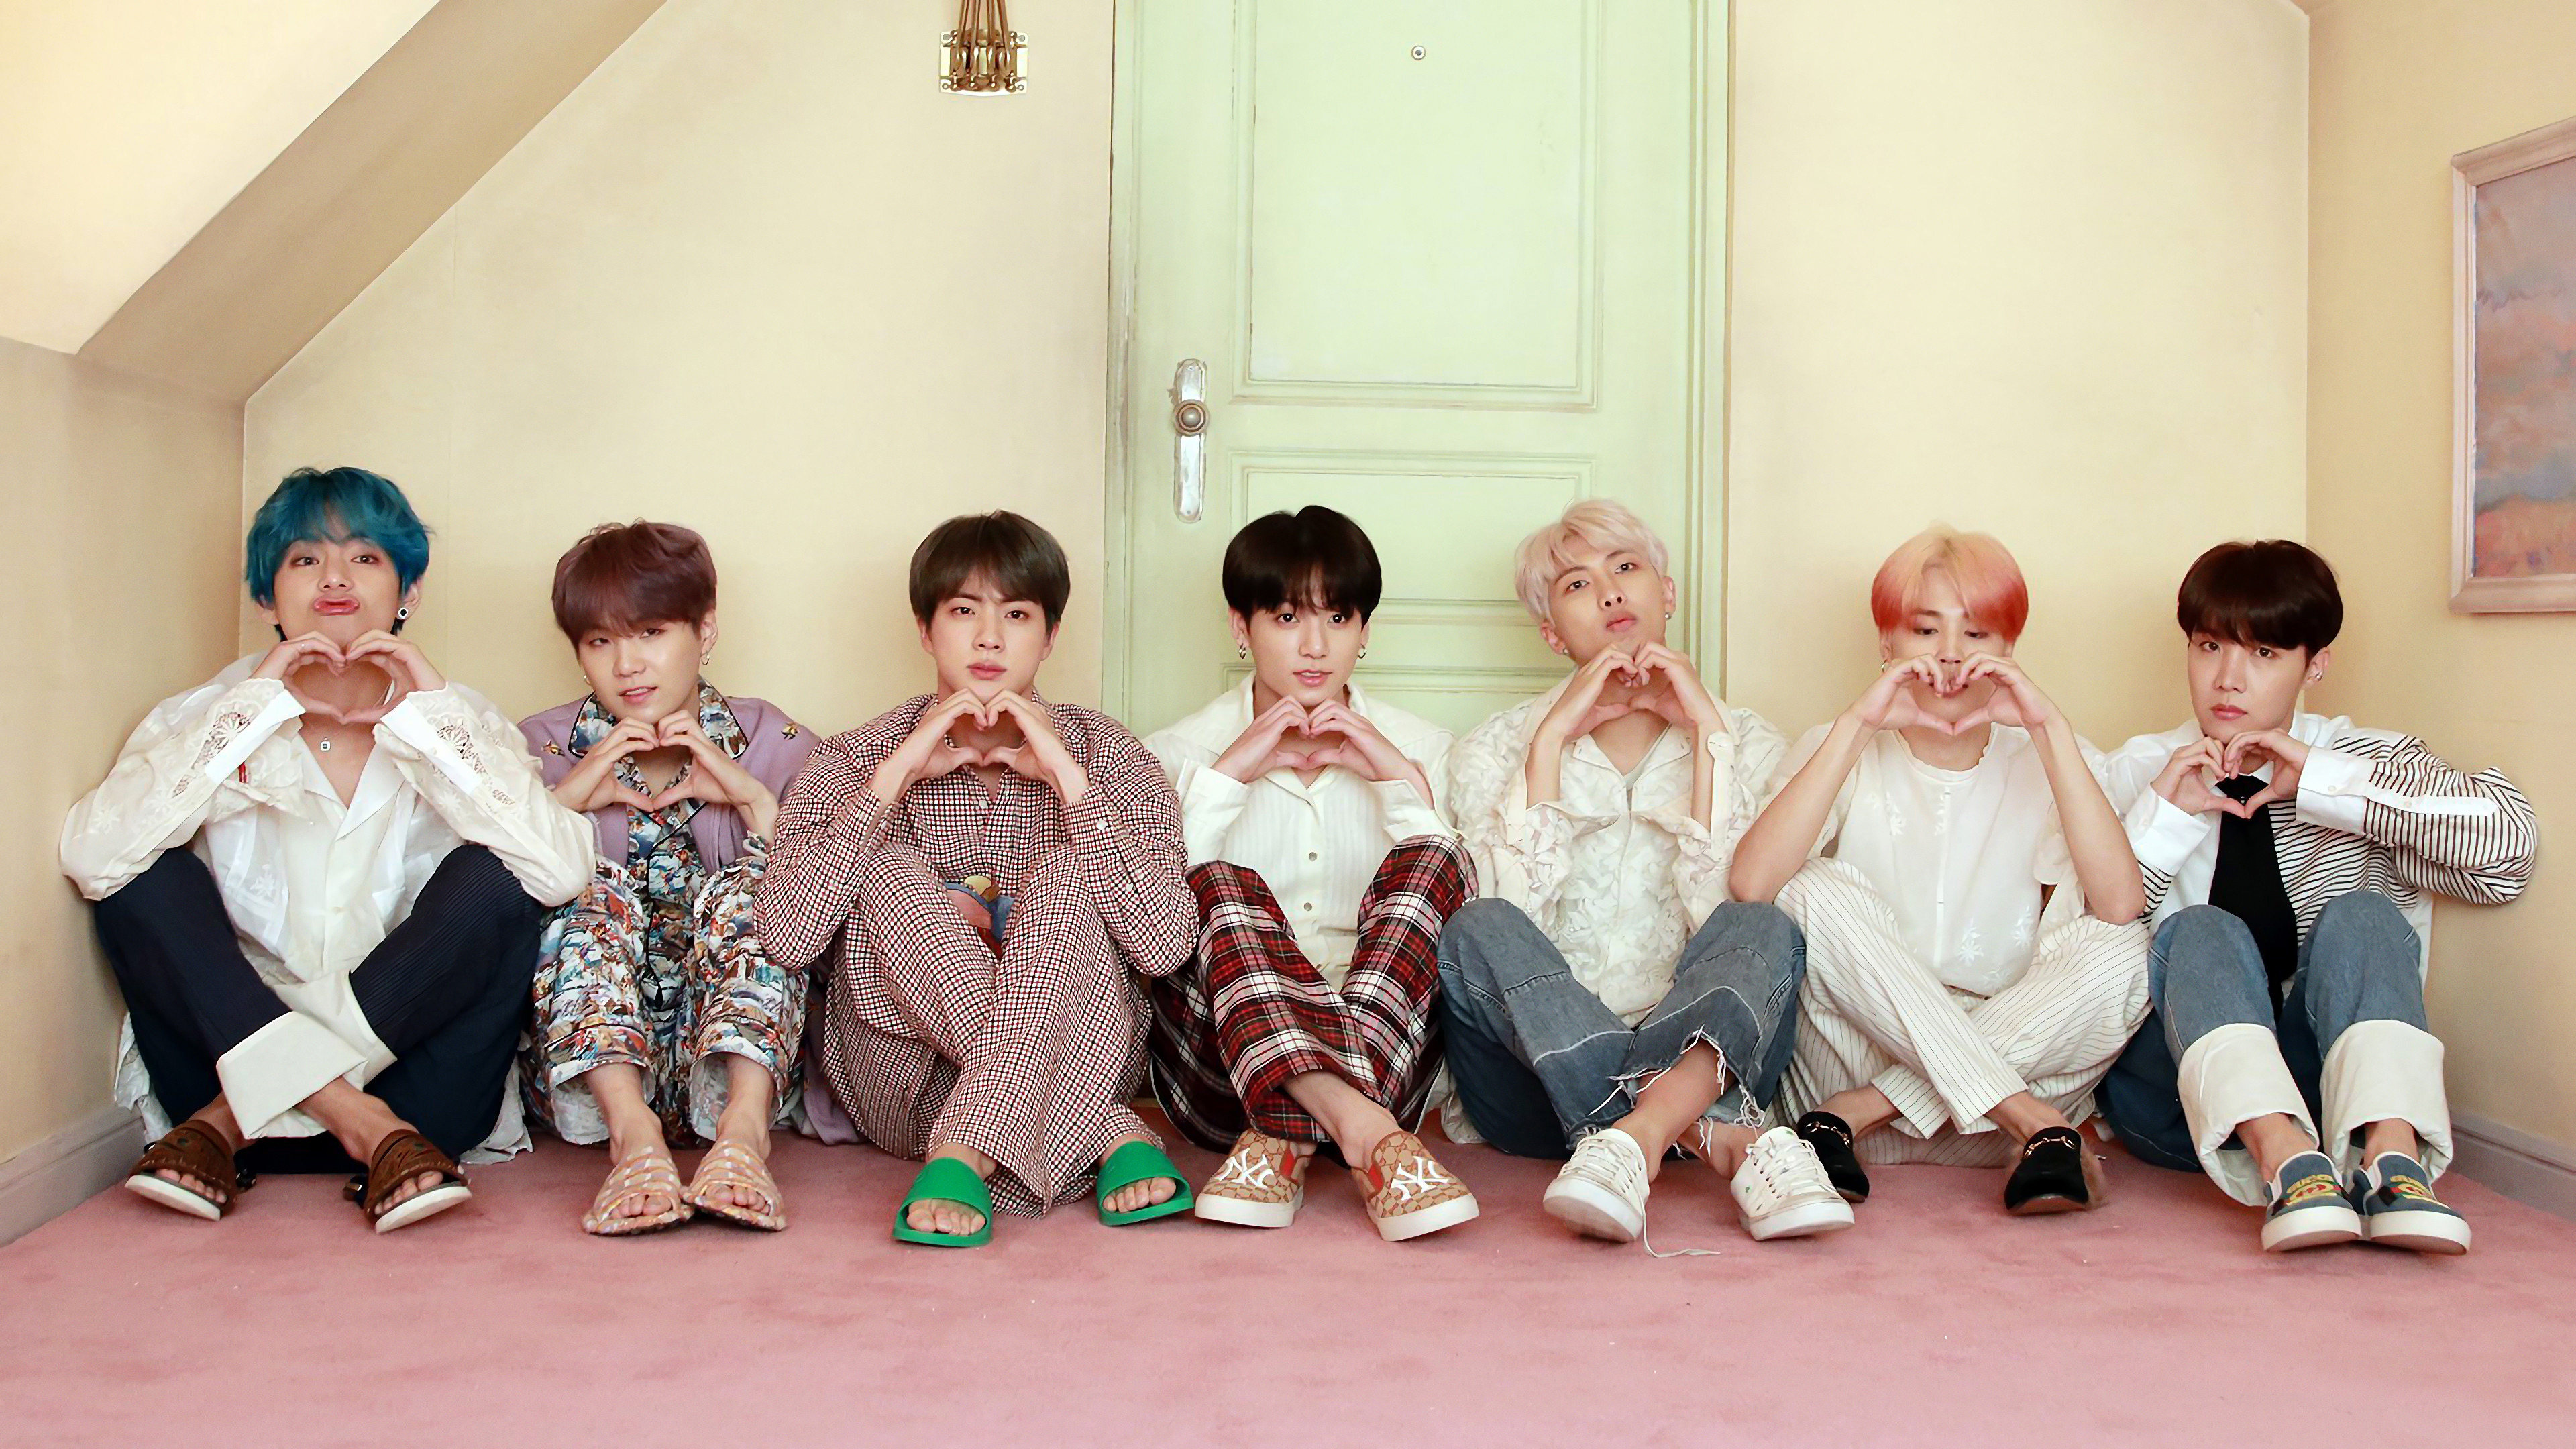 K-pop supergroup BTS reaffirmed their commitment to the “Love Myself” anti-violence campaign in partnership with Unicef this month. Photo: Big Hit Entertainment